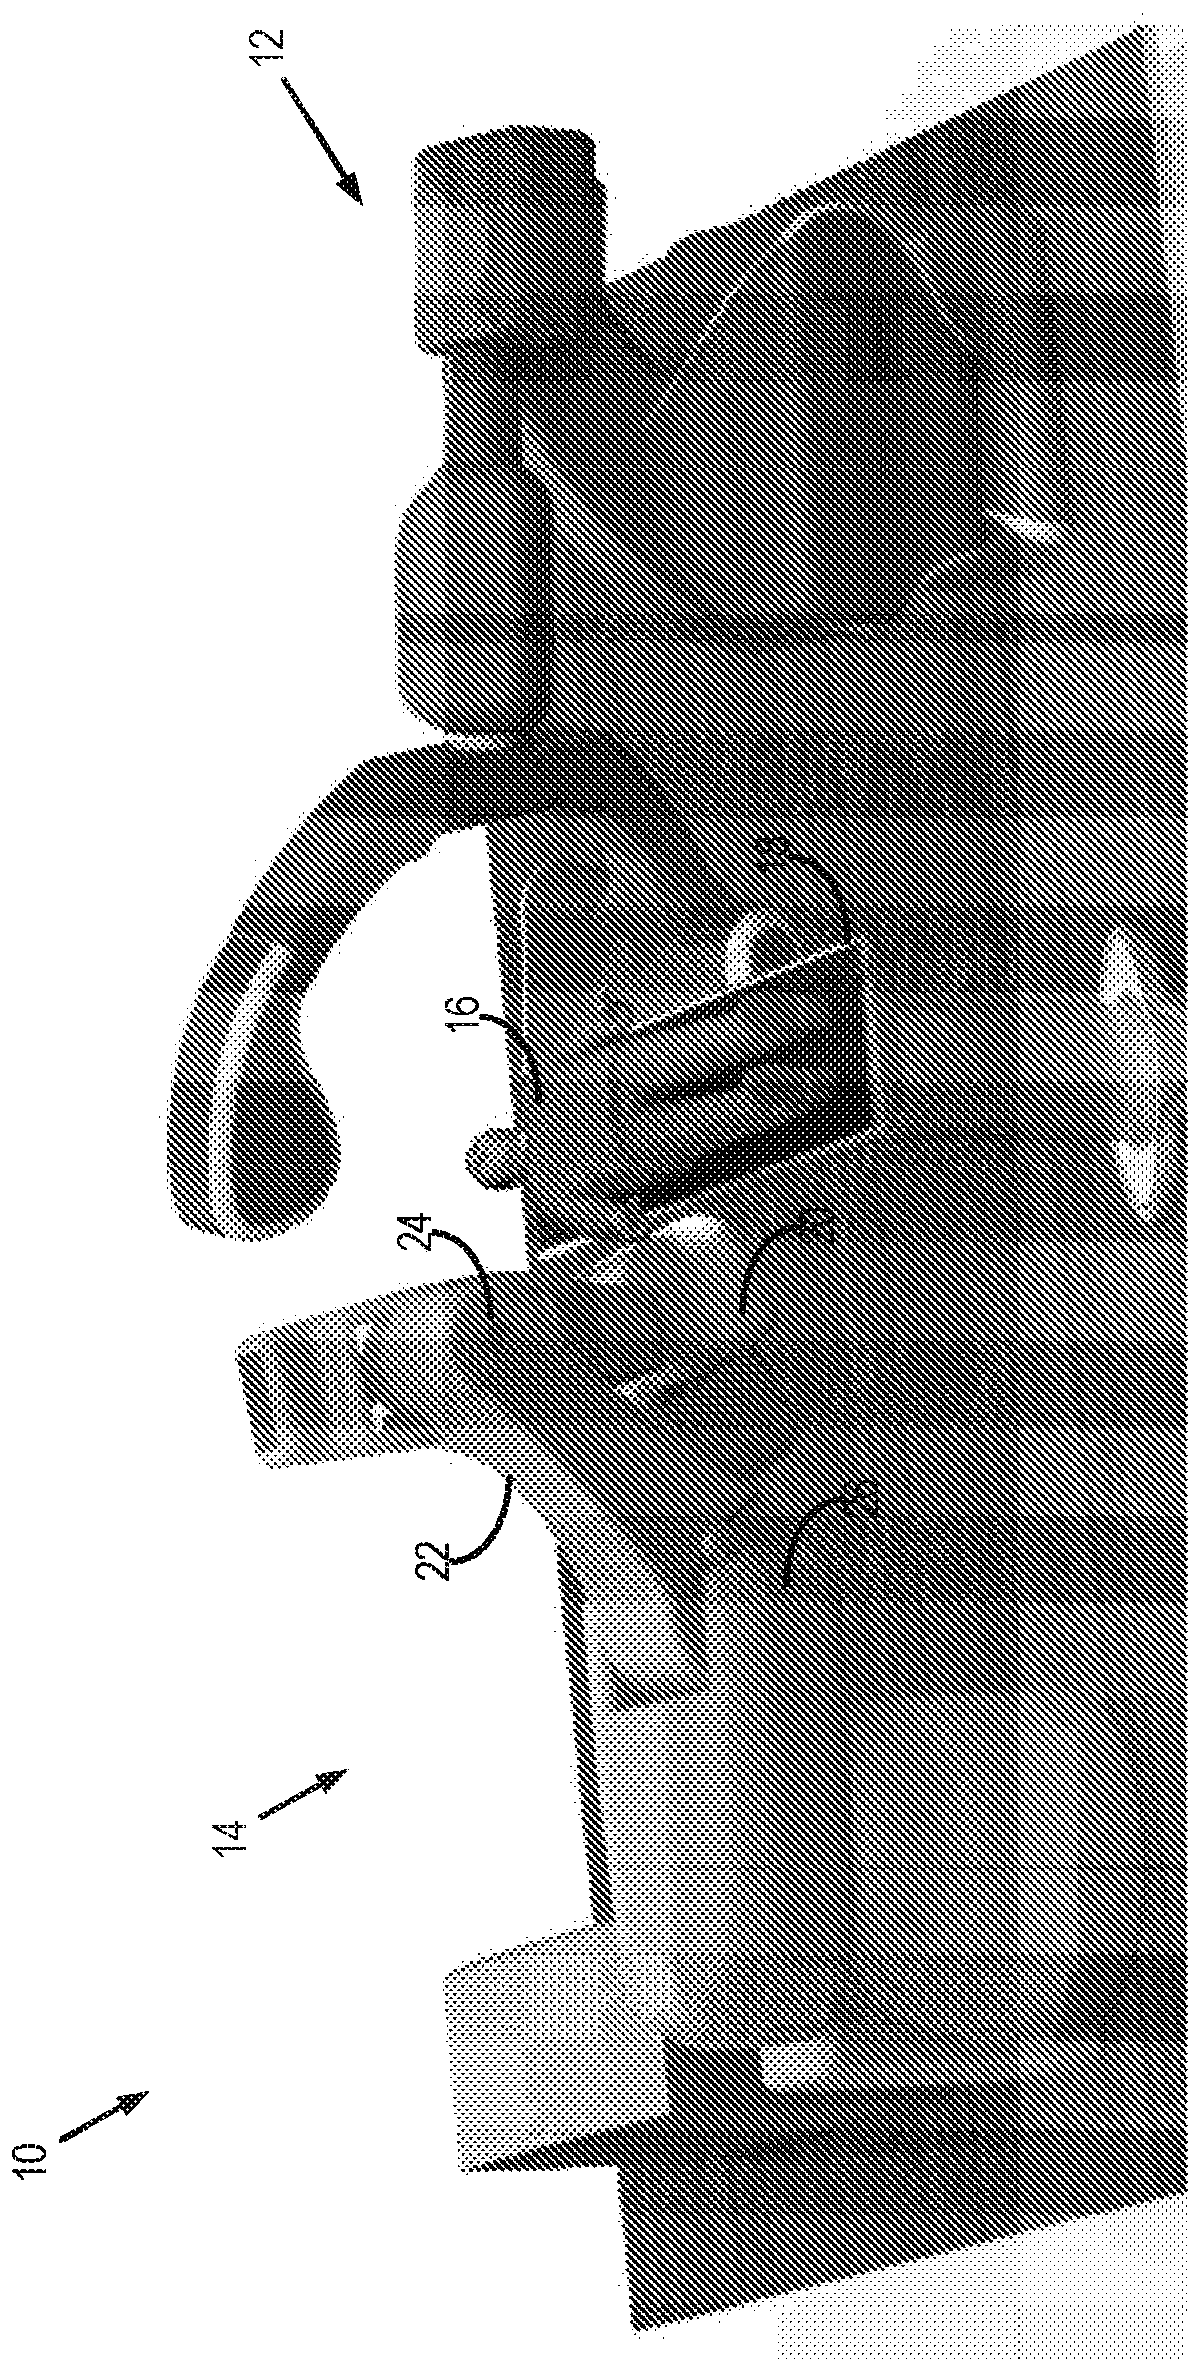 Systems and methods for image-guided radiotherapy using dual robot architecture